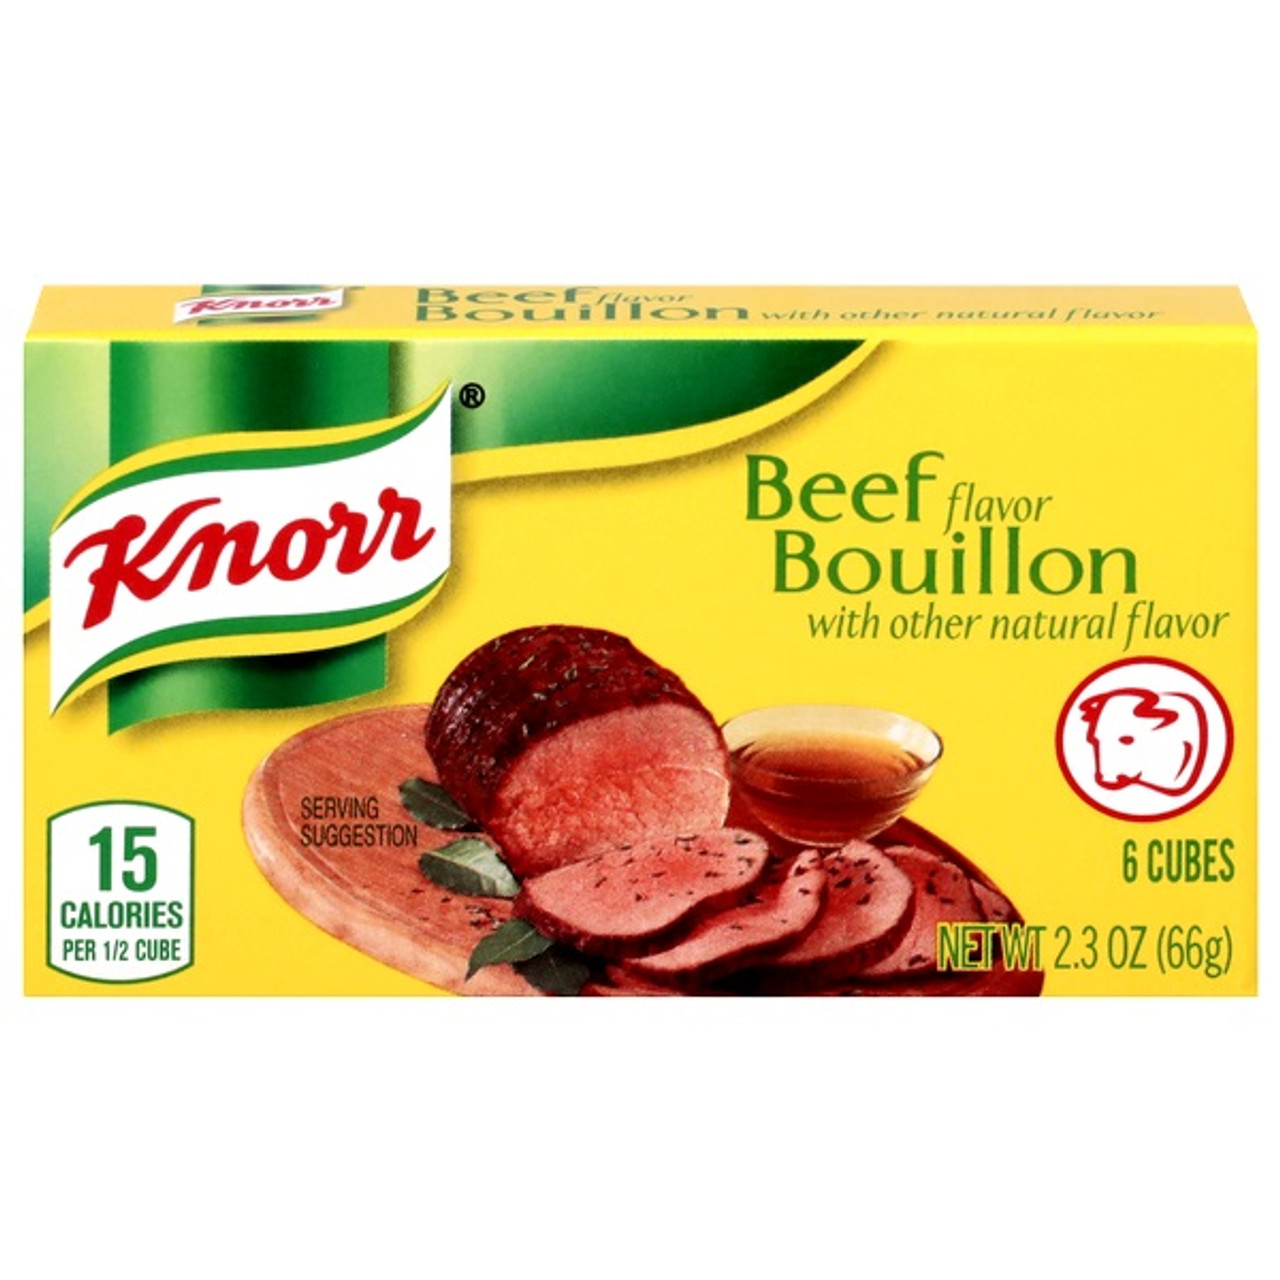 Knorr Beef Bouillon, Extra Large Cubes - 6 cubes, 2.3 oz